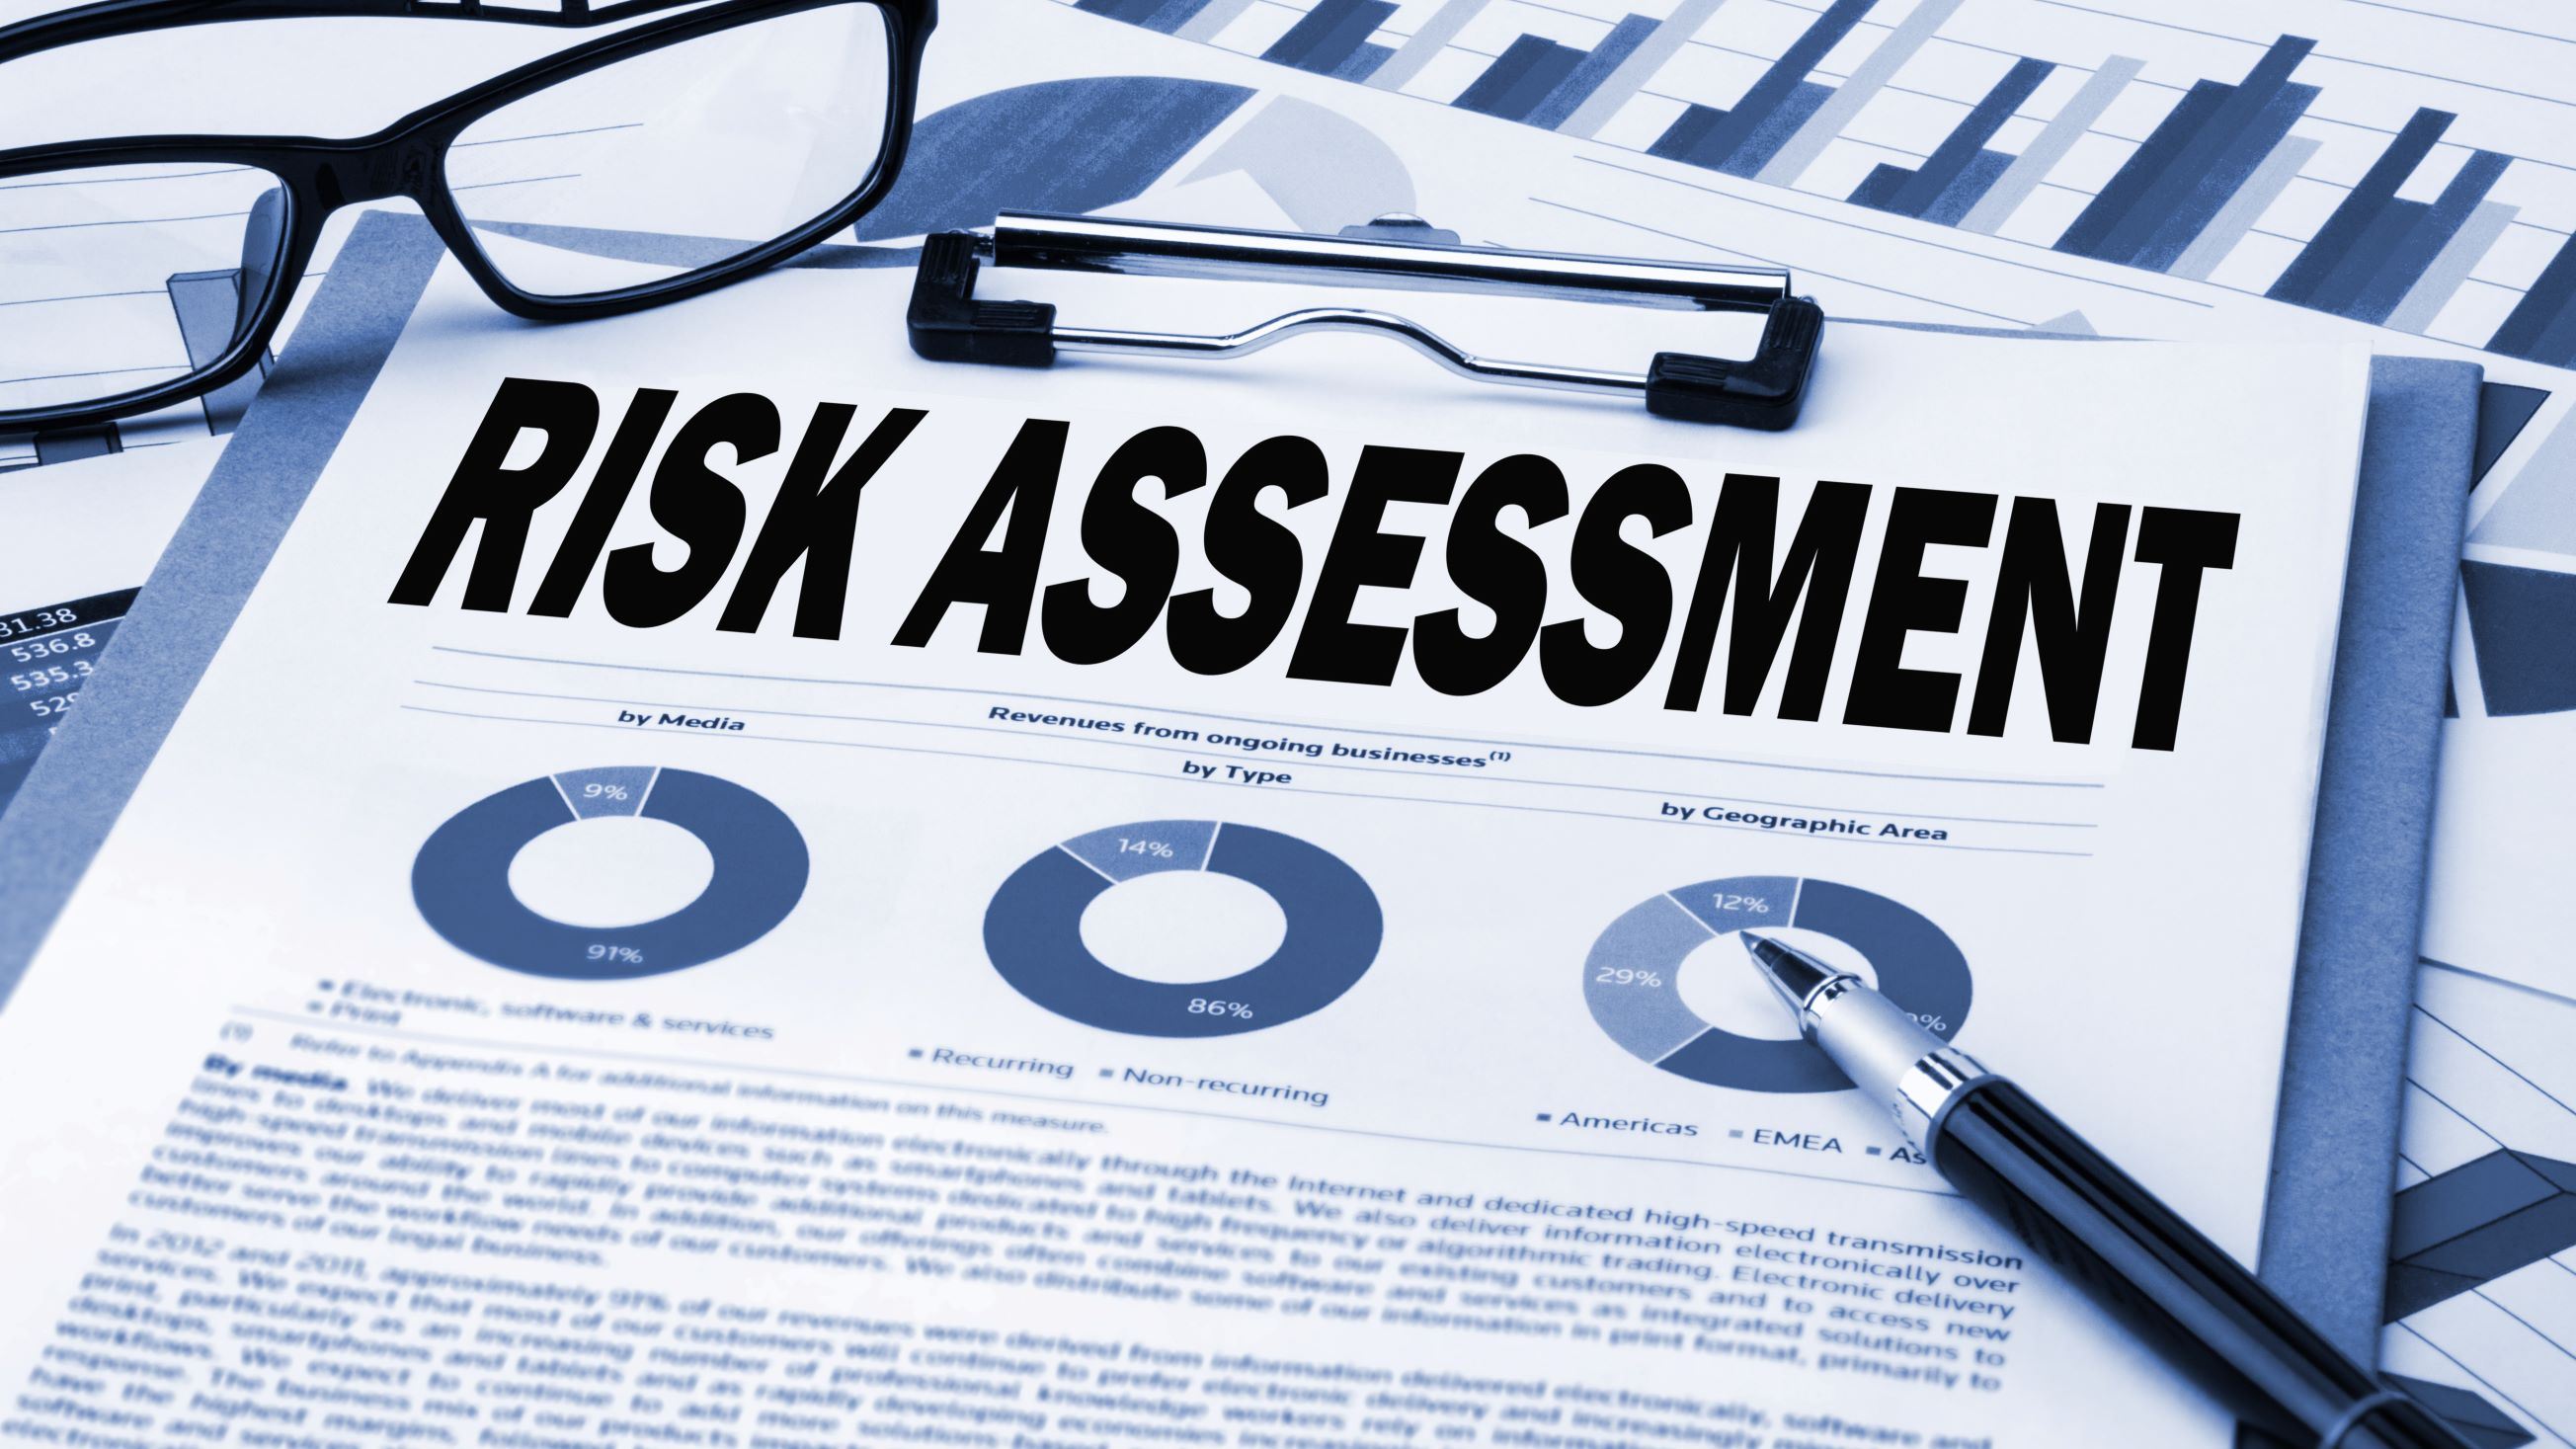 image of a risk assessment document